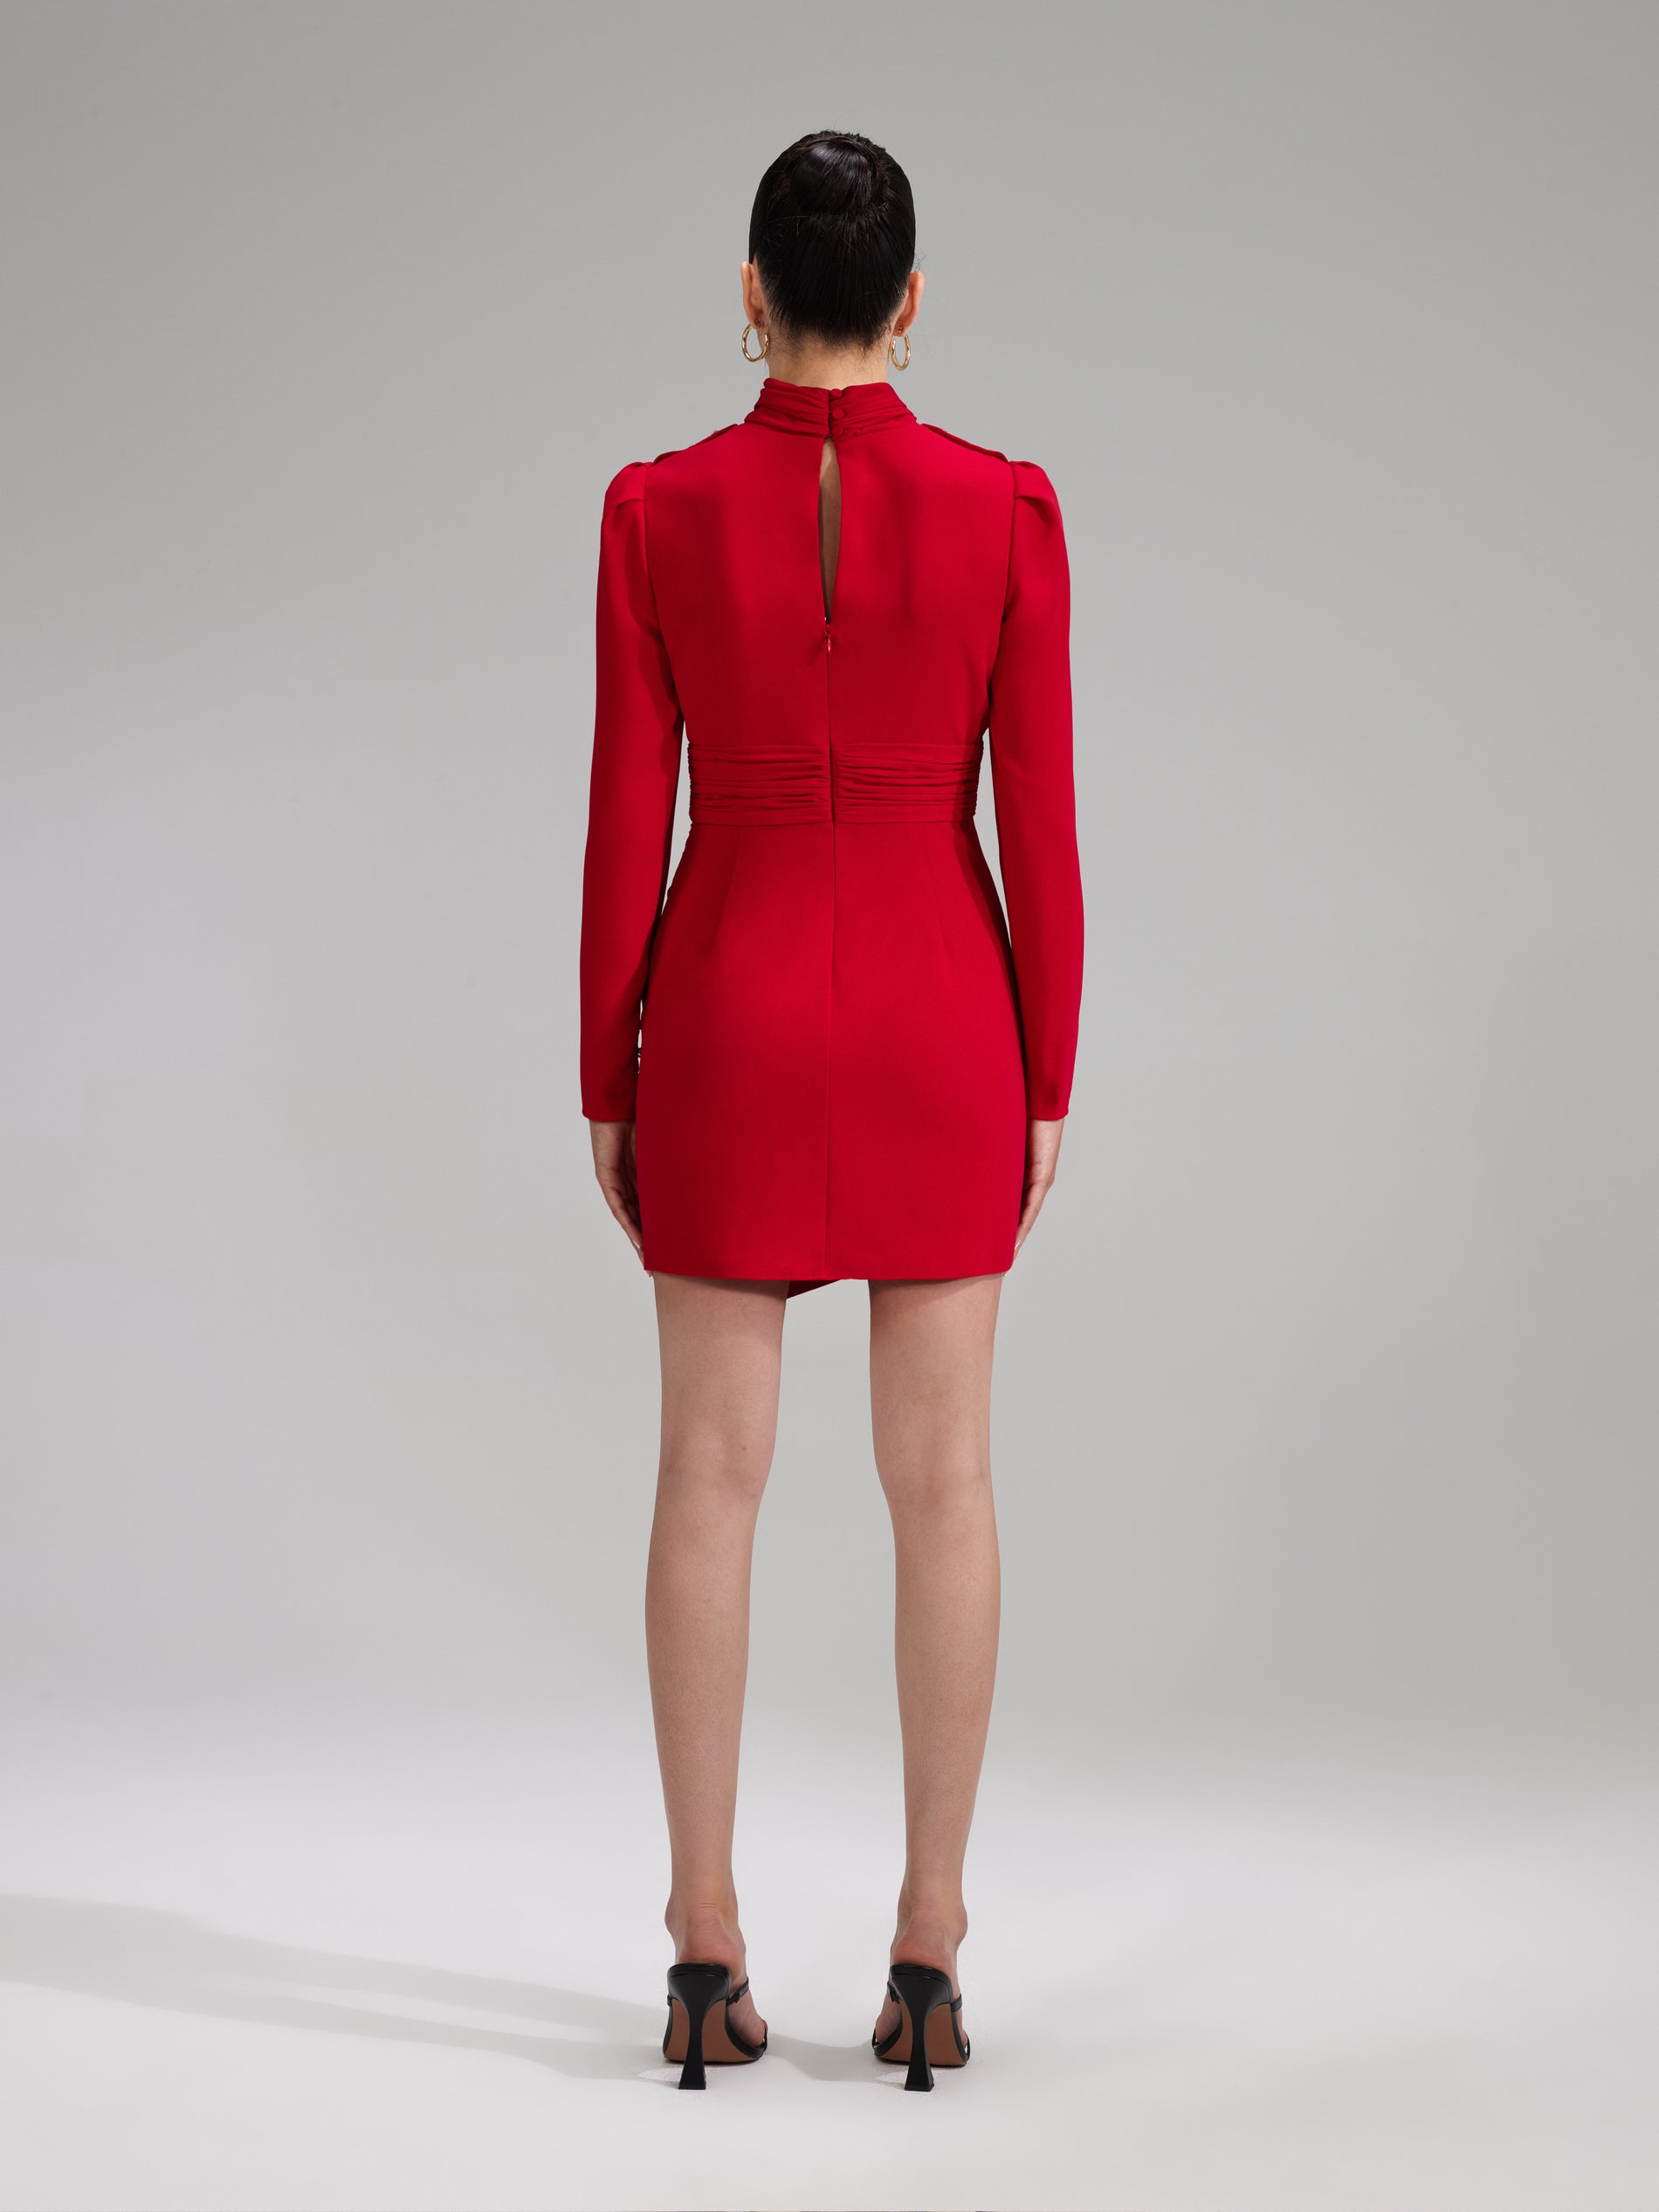 A woman wearing the Red Stretch Crepe Twisted Collar Mini Dress